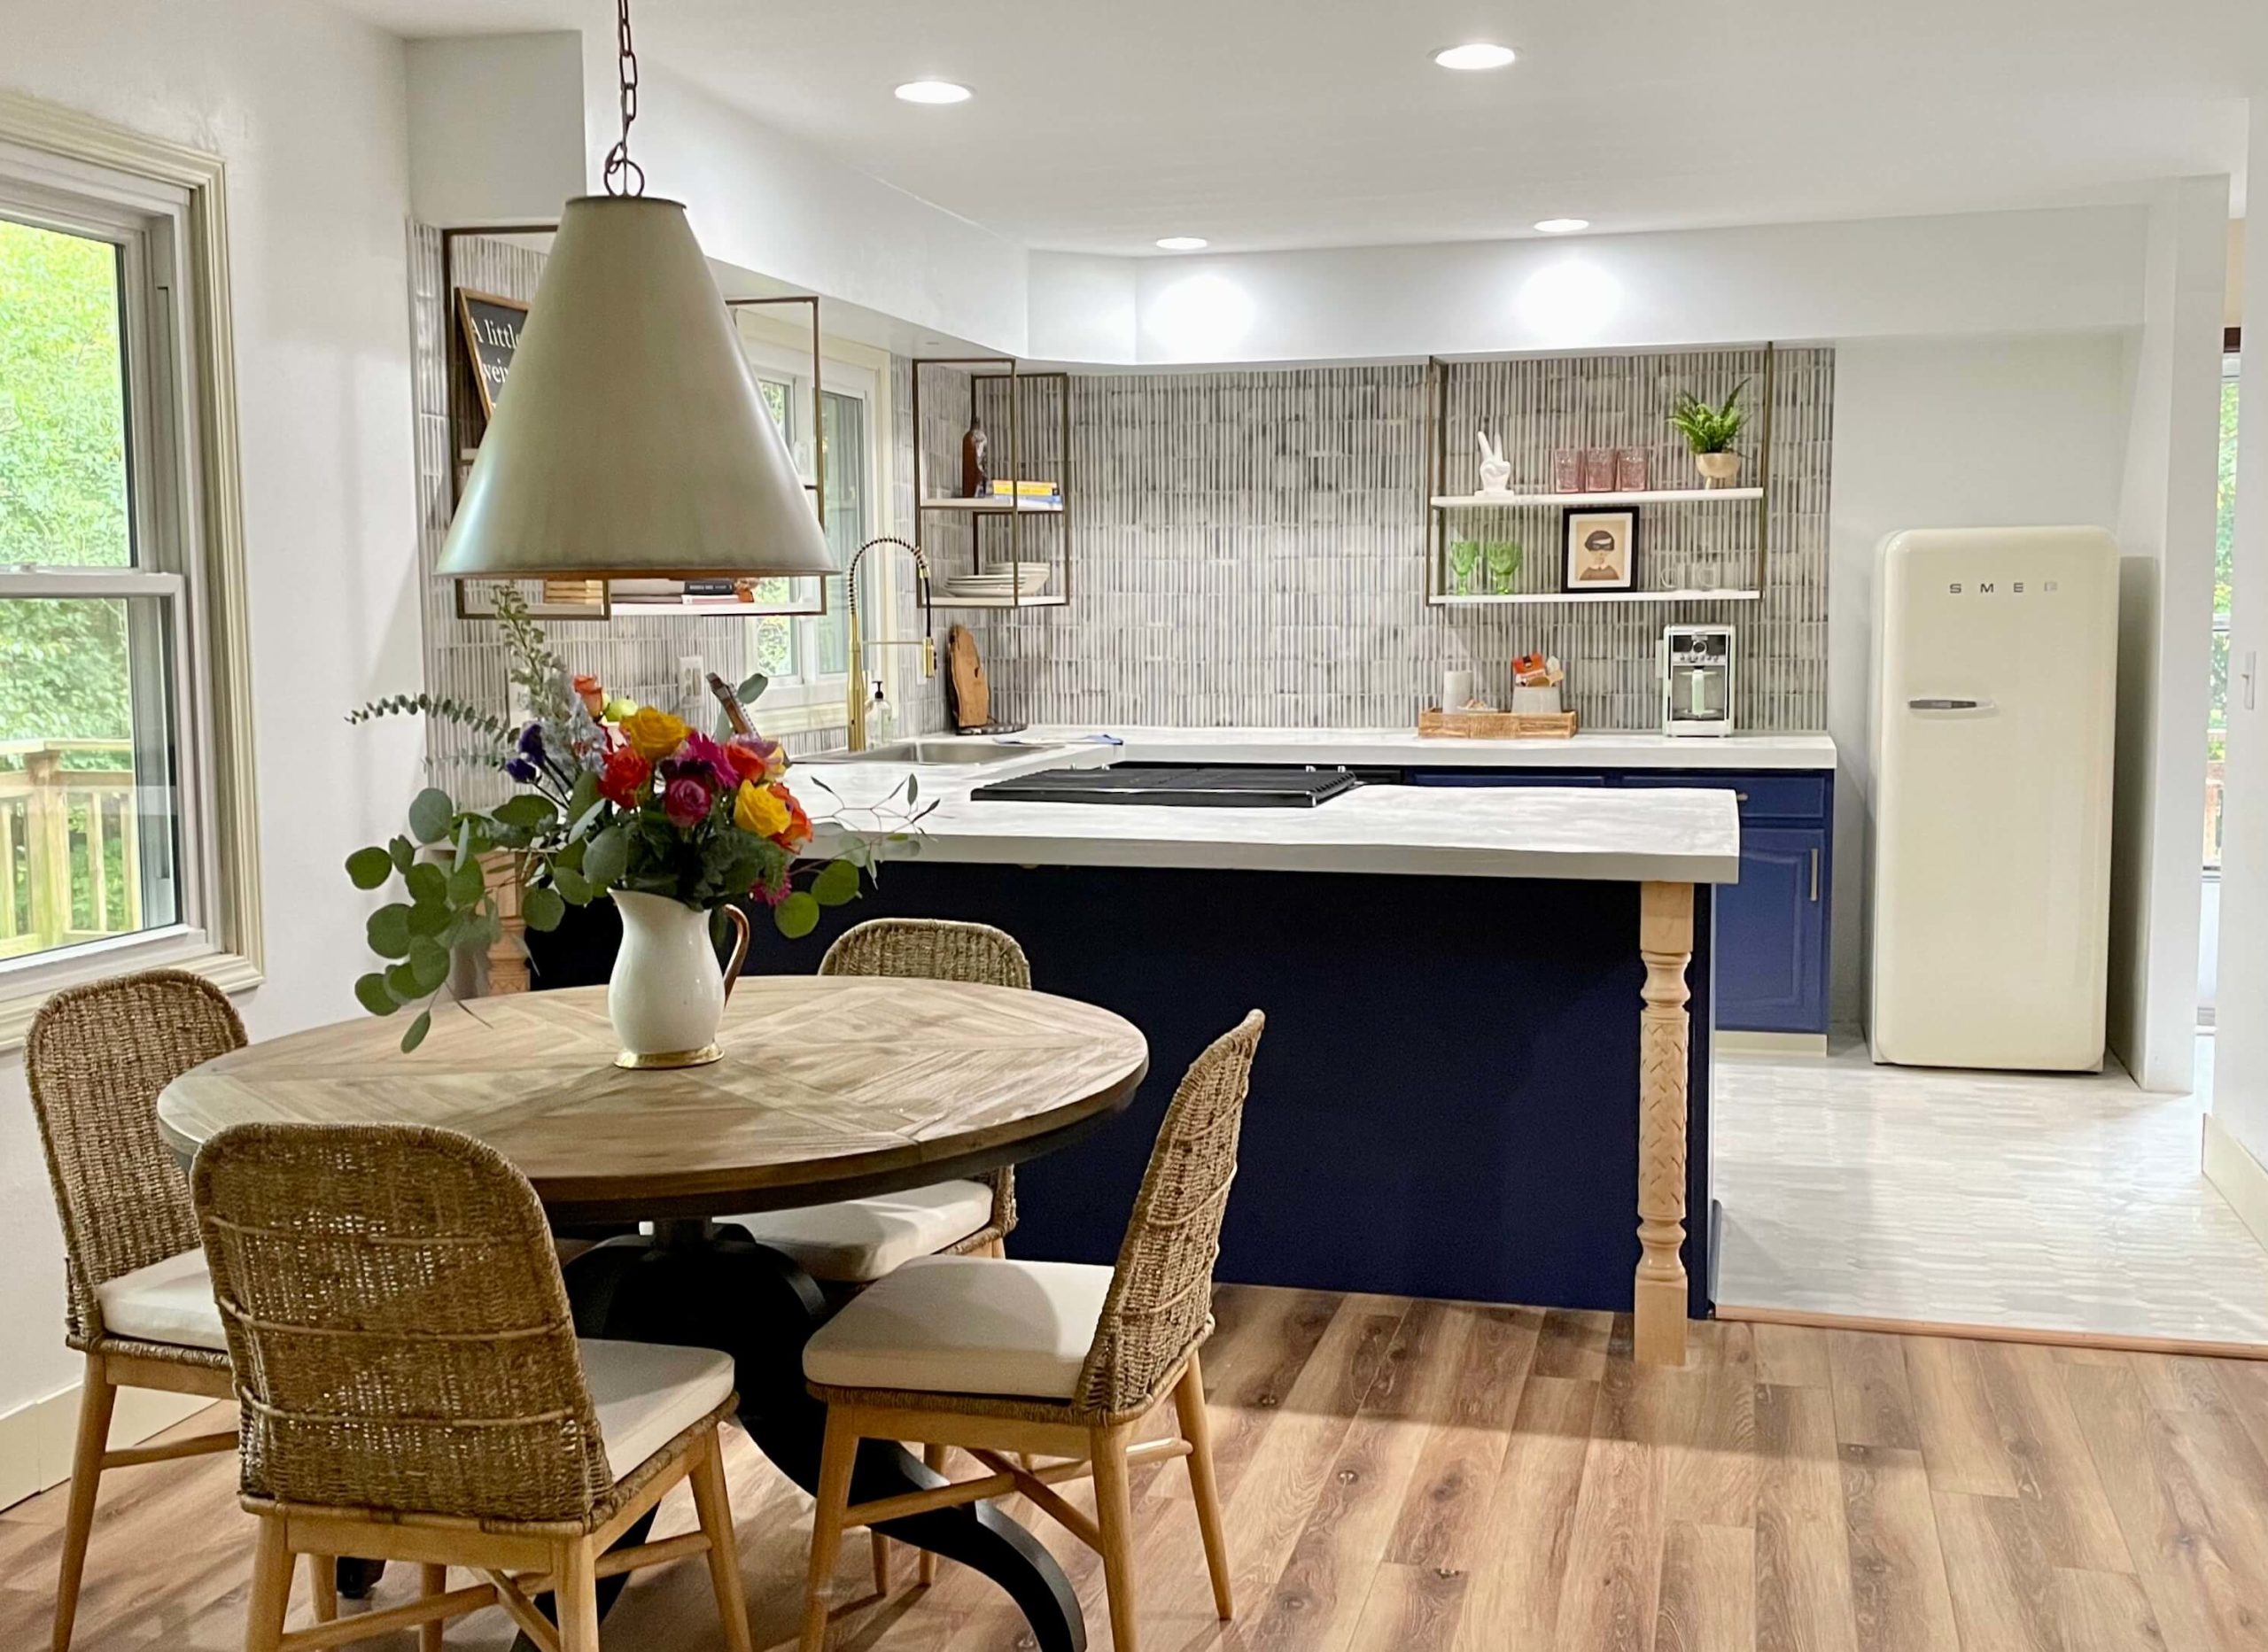 Modern Cottage Kitchen with White concrete countertops and painted navy cabinets blue and white striped tile